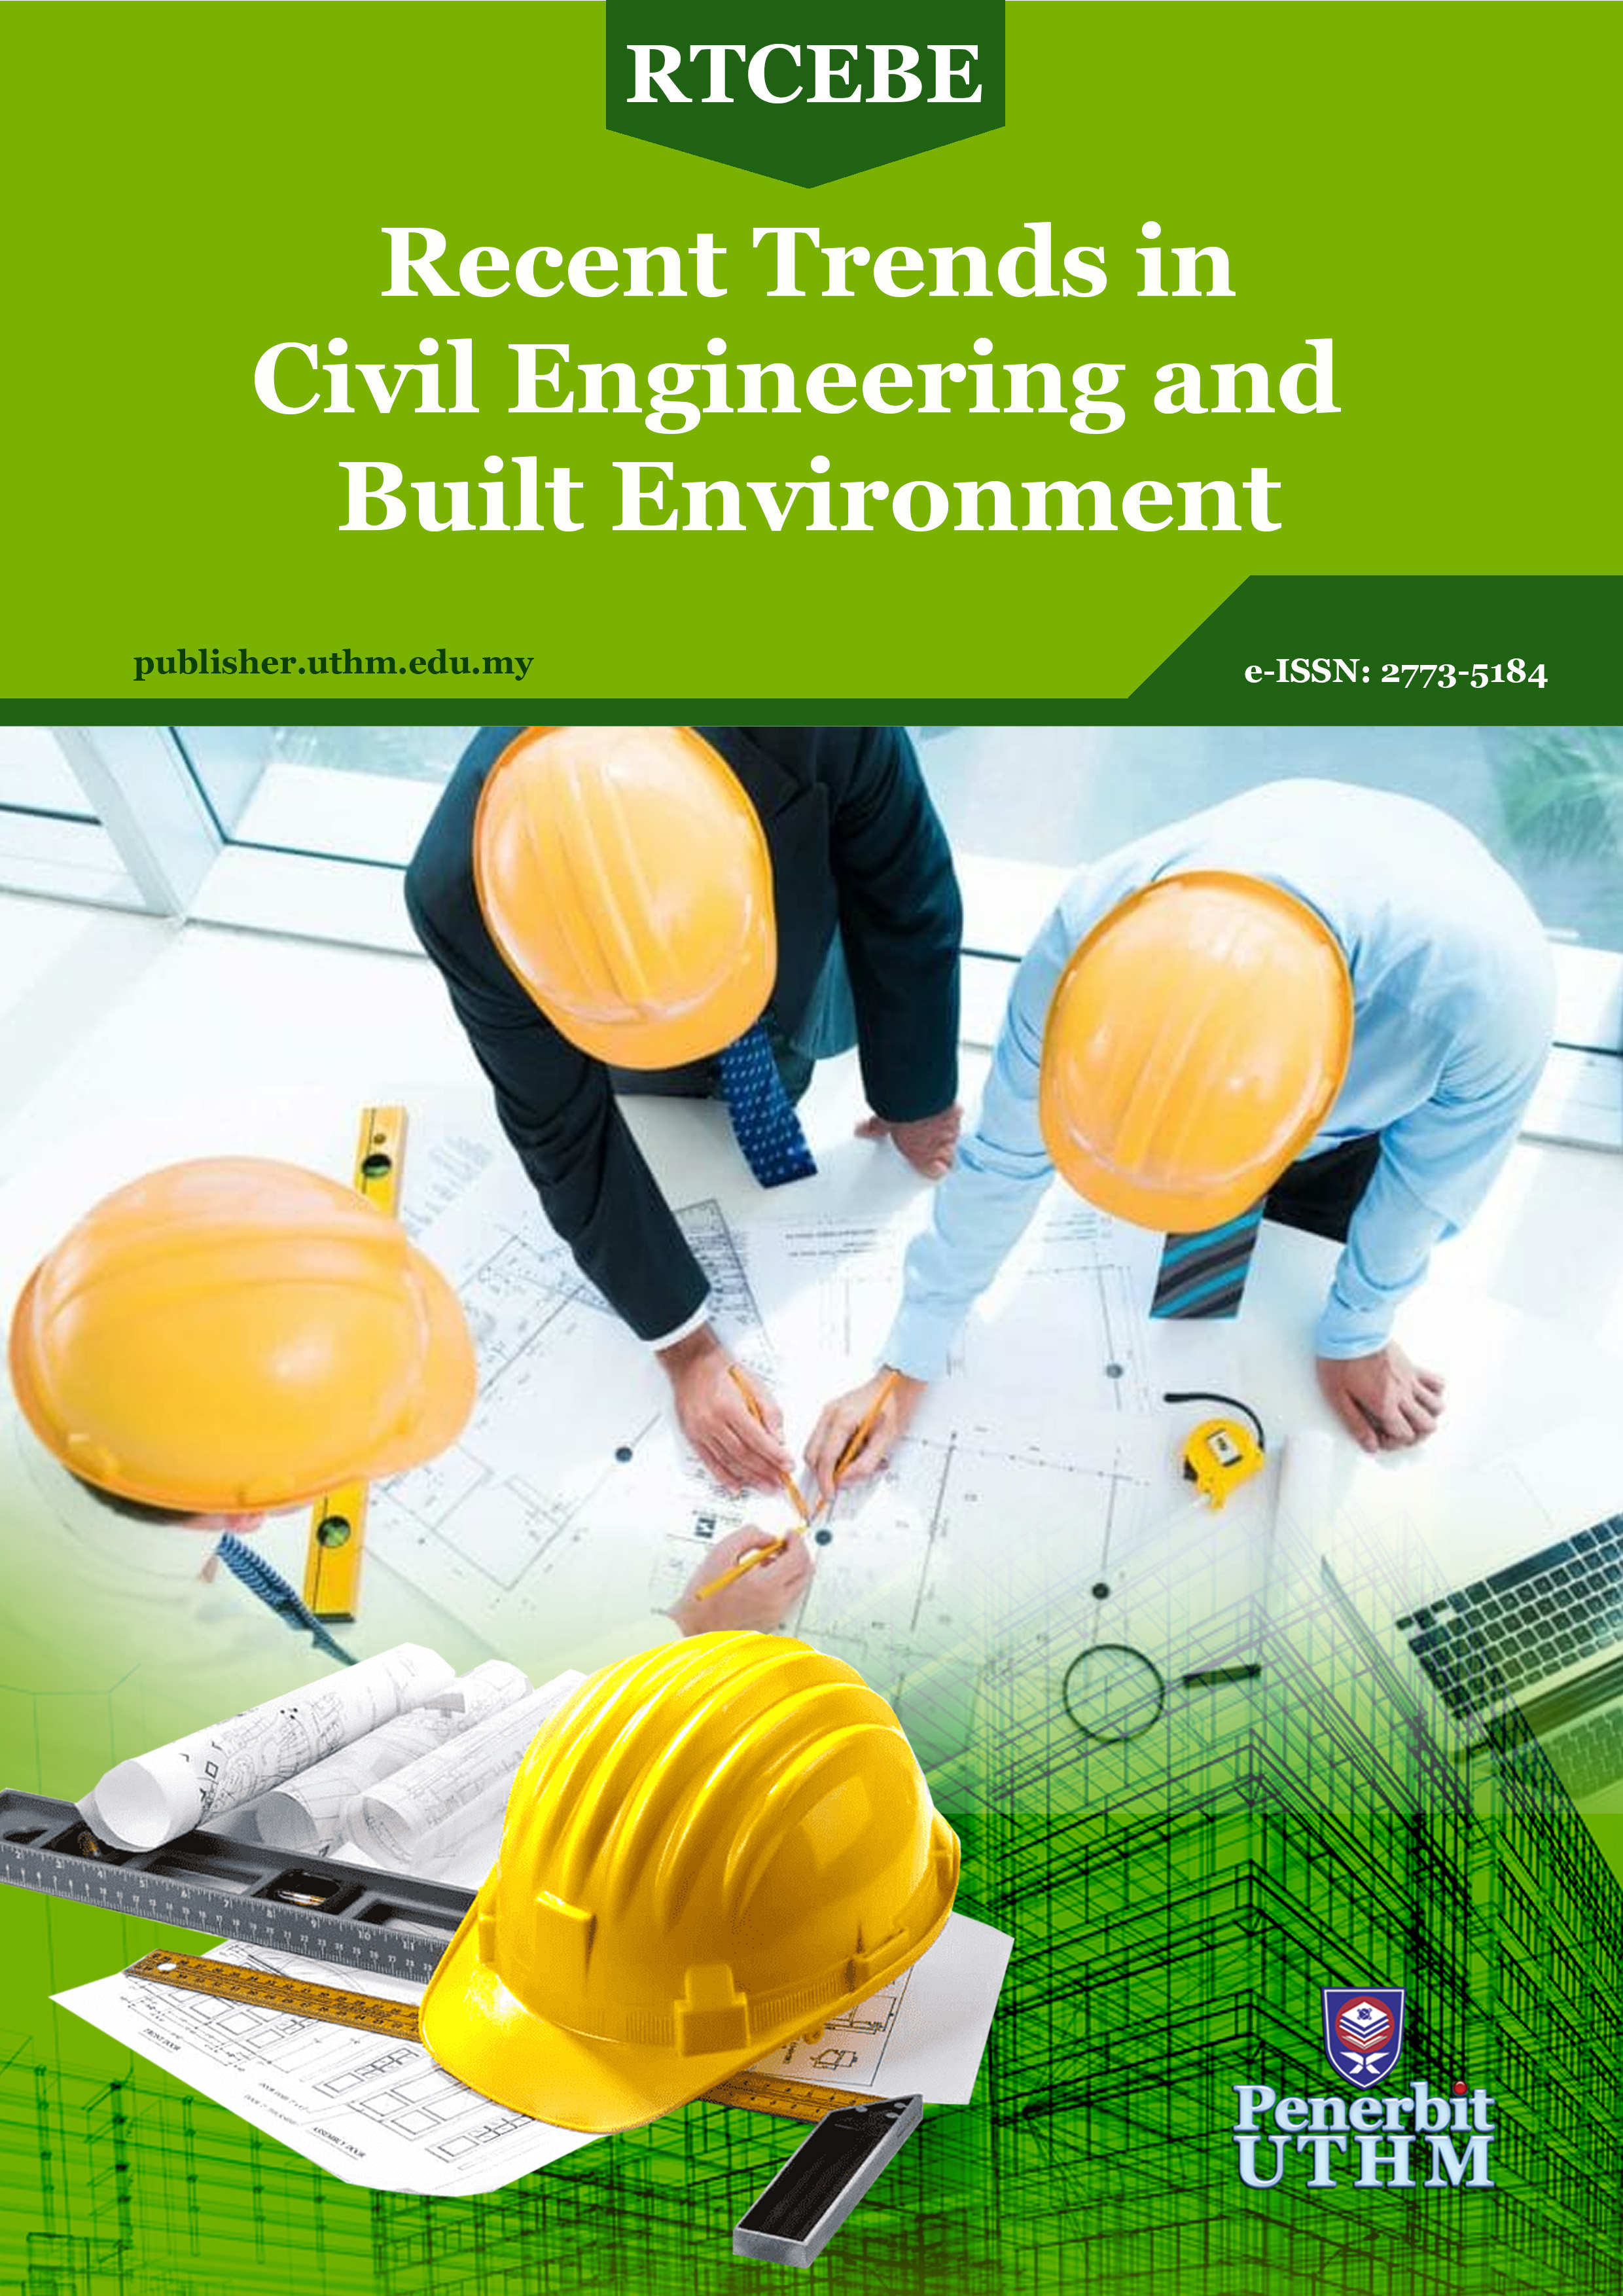 Recent Trends in Civil Engineering and Built Environment